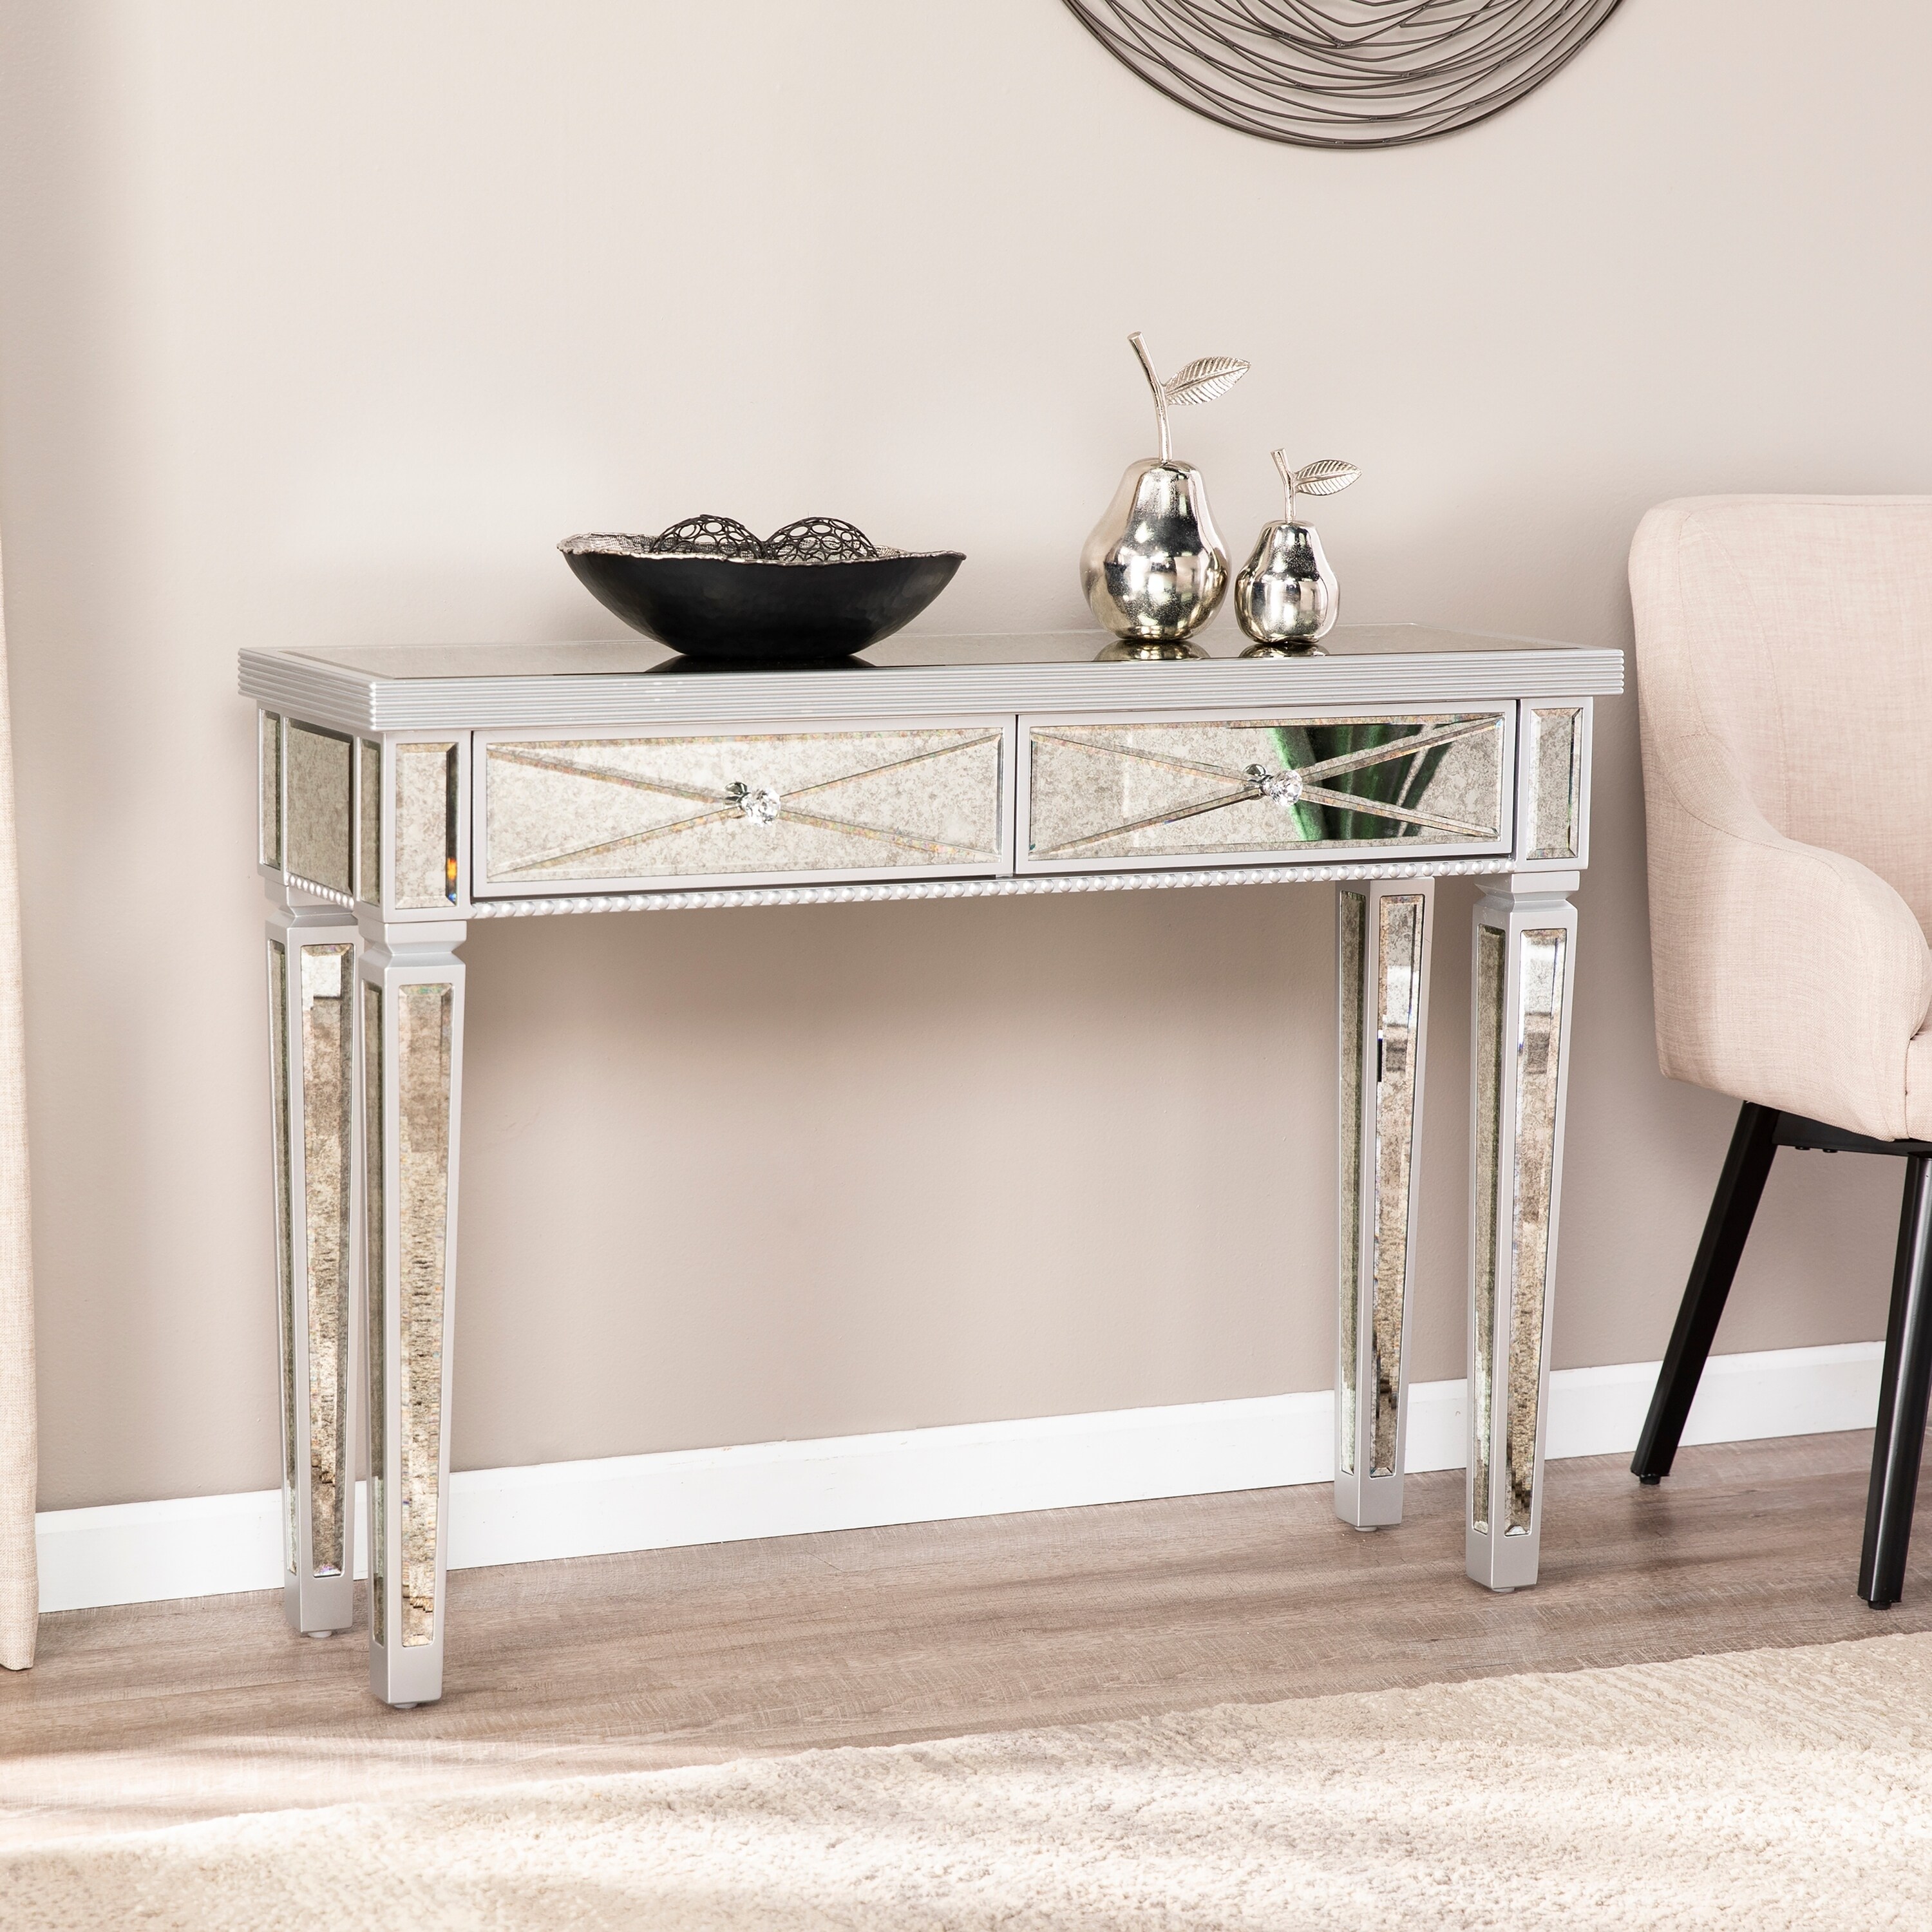 Silver Orchid Ham Mirrored Console Table